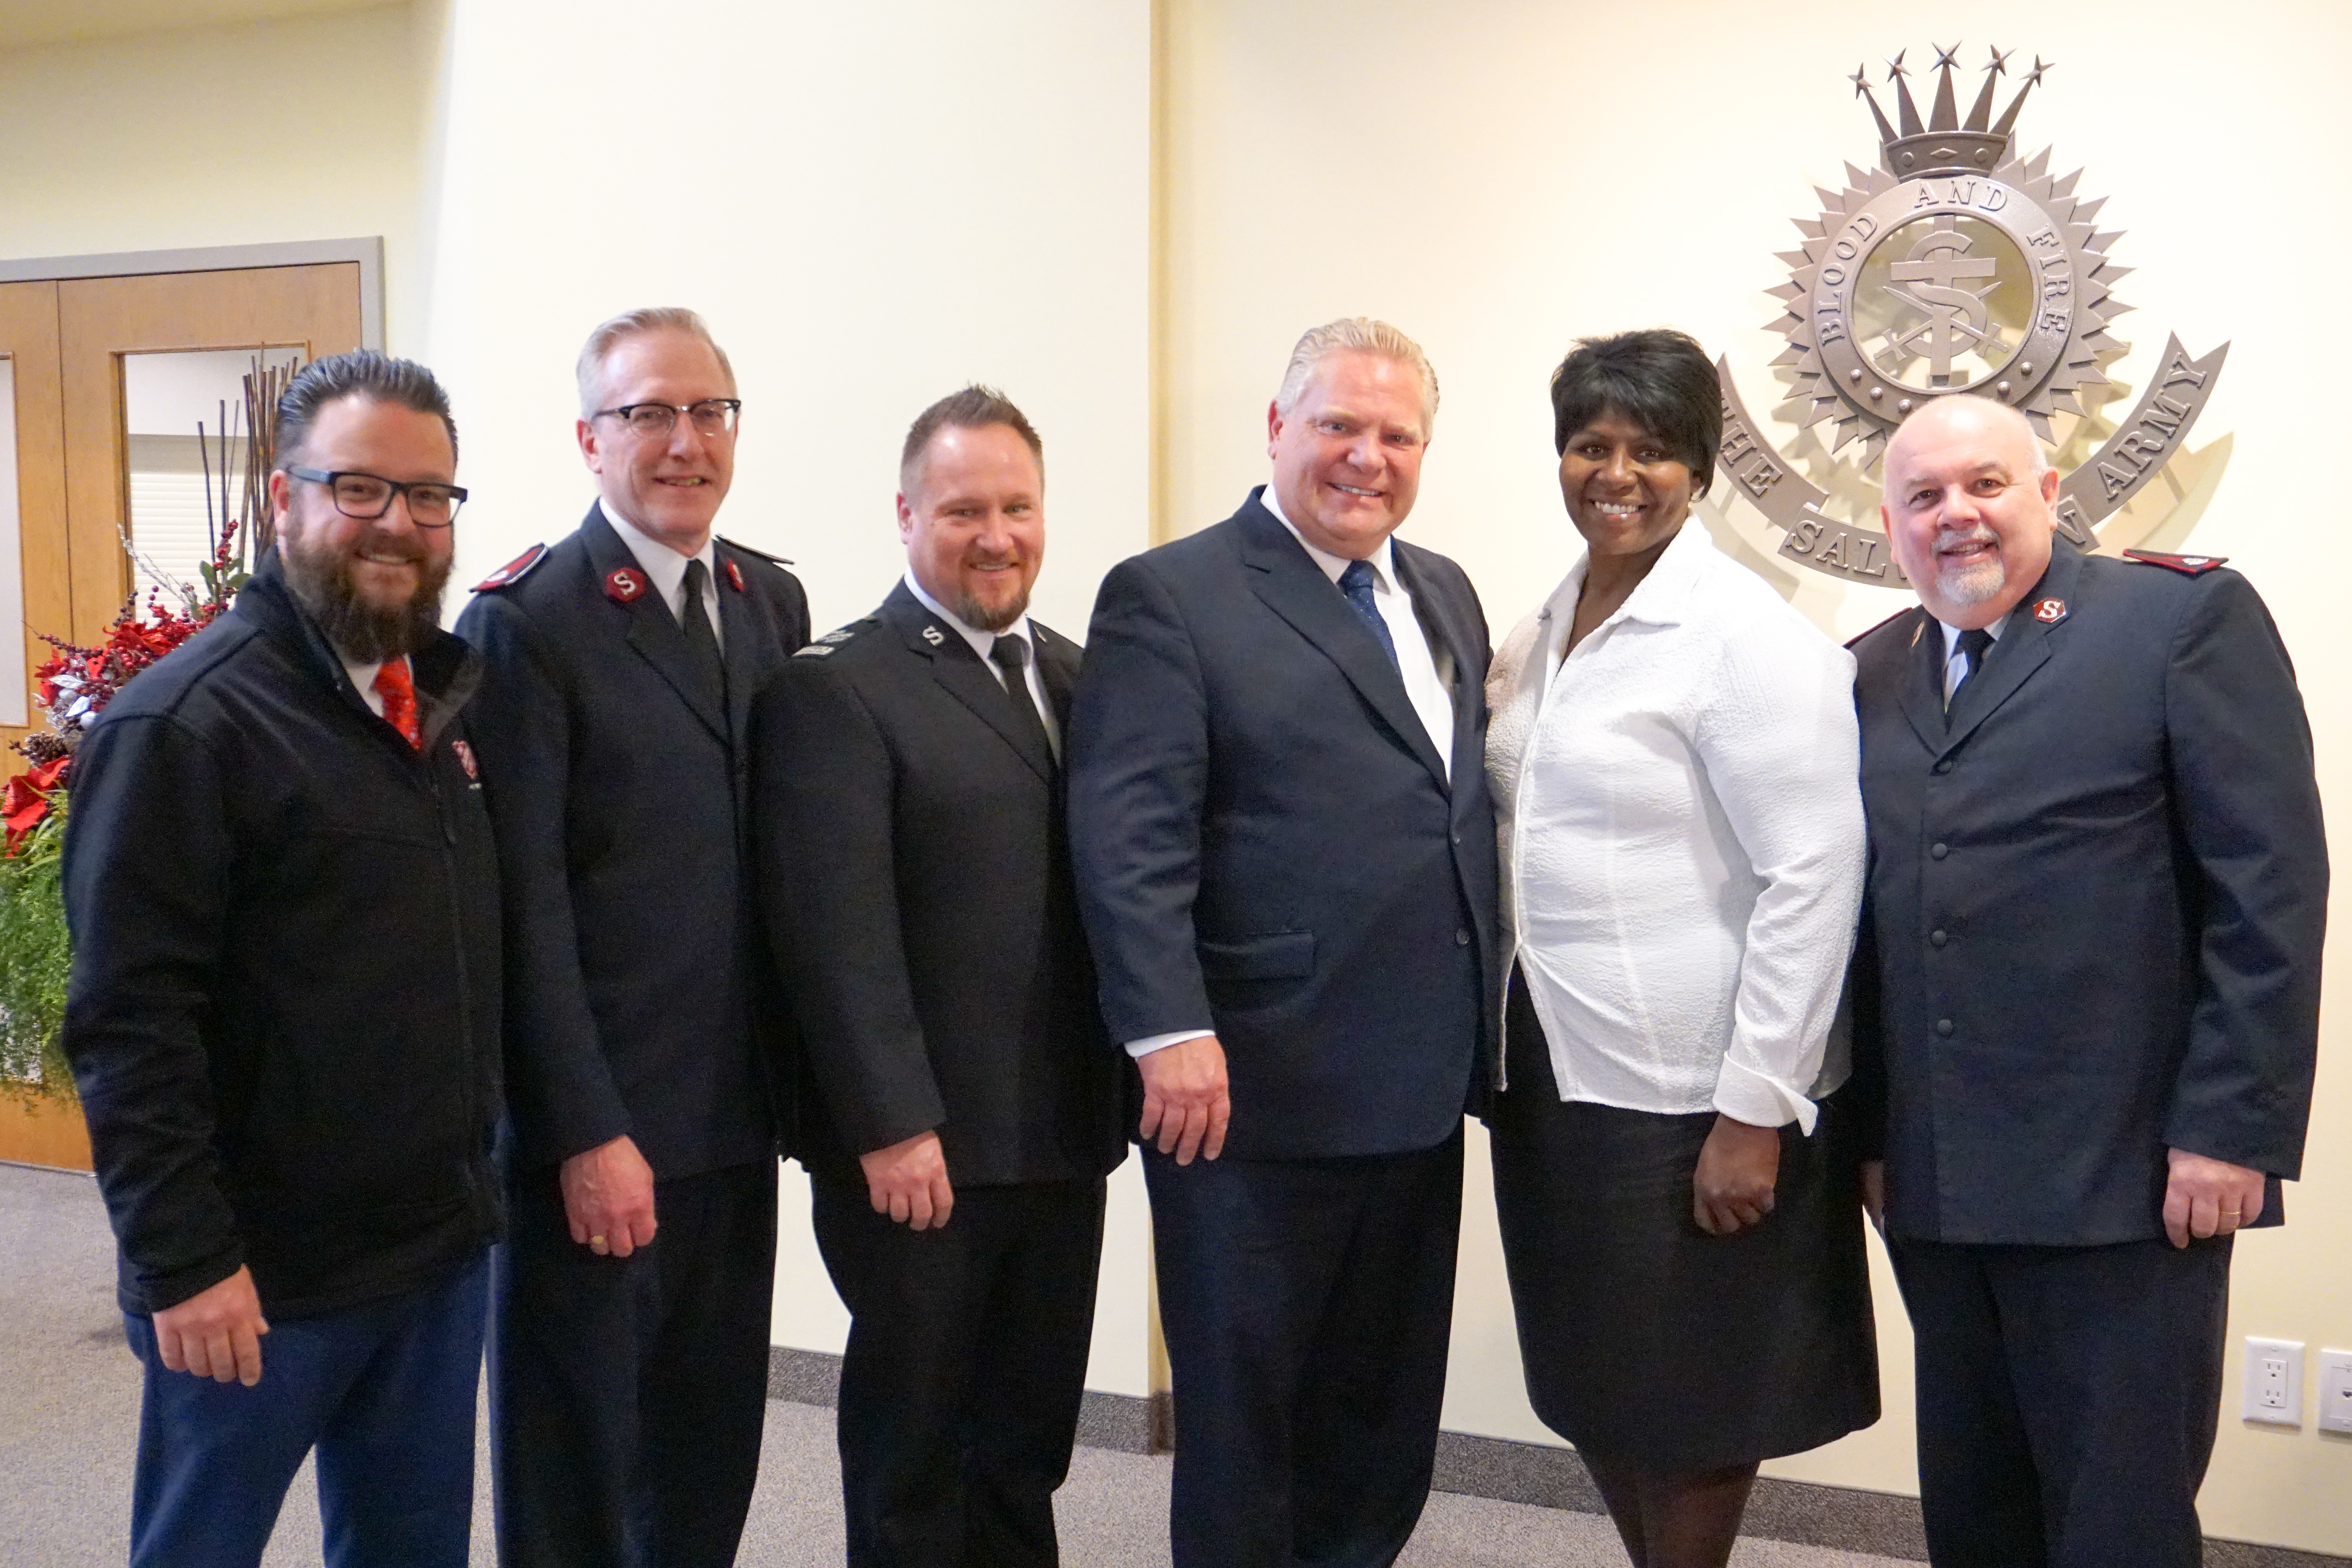 Premier Doug Ford and Salvation Army Reps at Etobicoke Temple